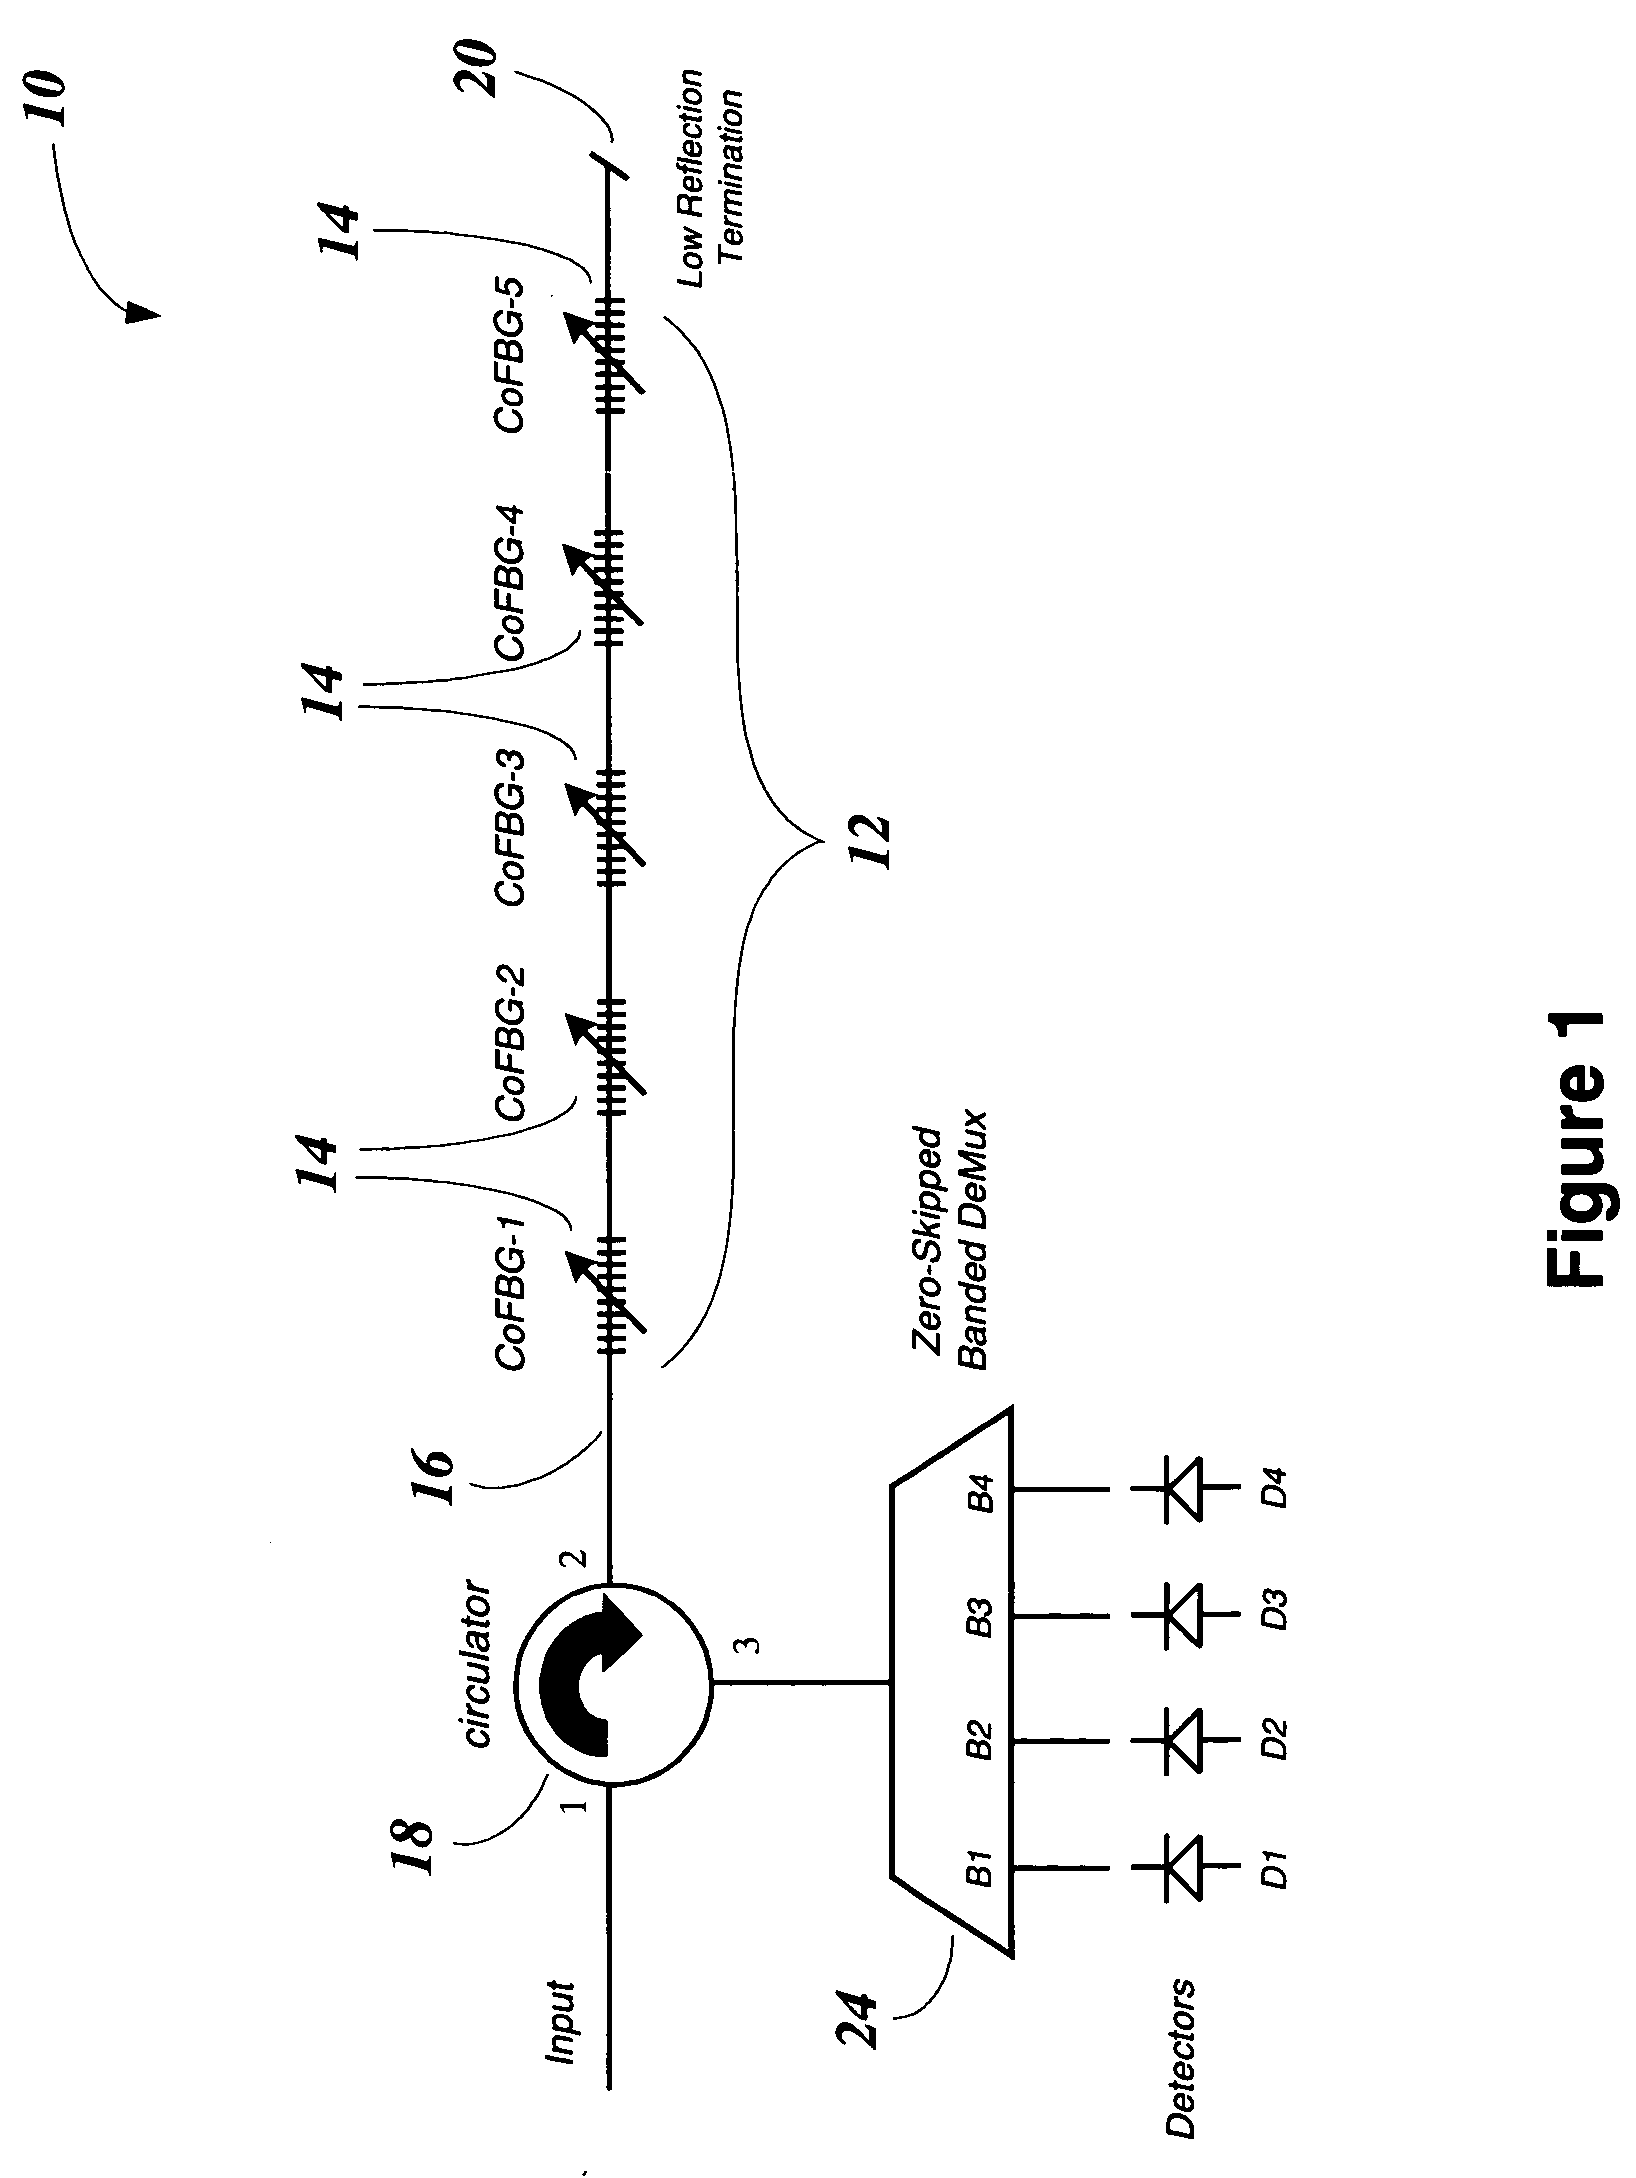 Optical performance monitor using co-located switchable fiber bragg grating array